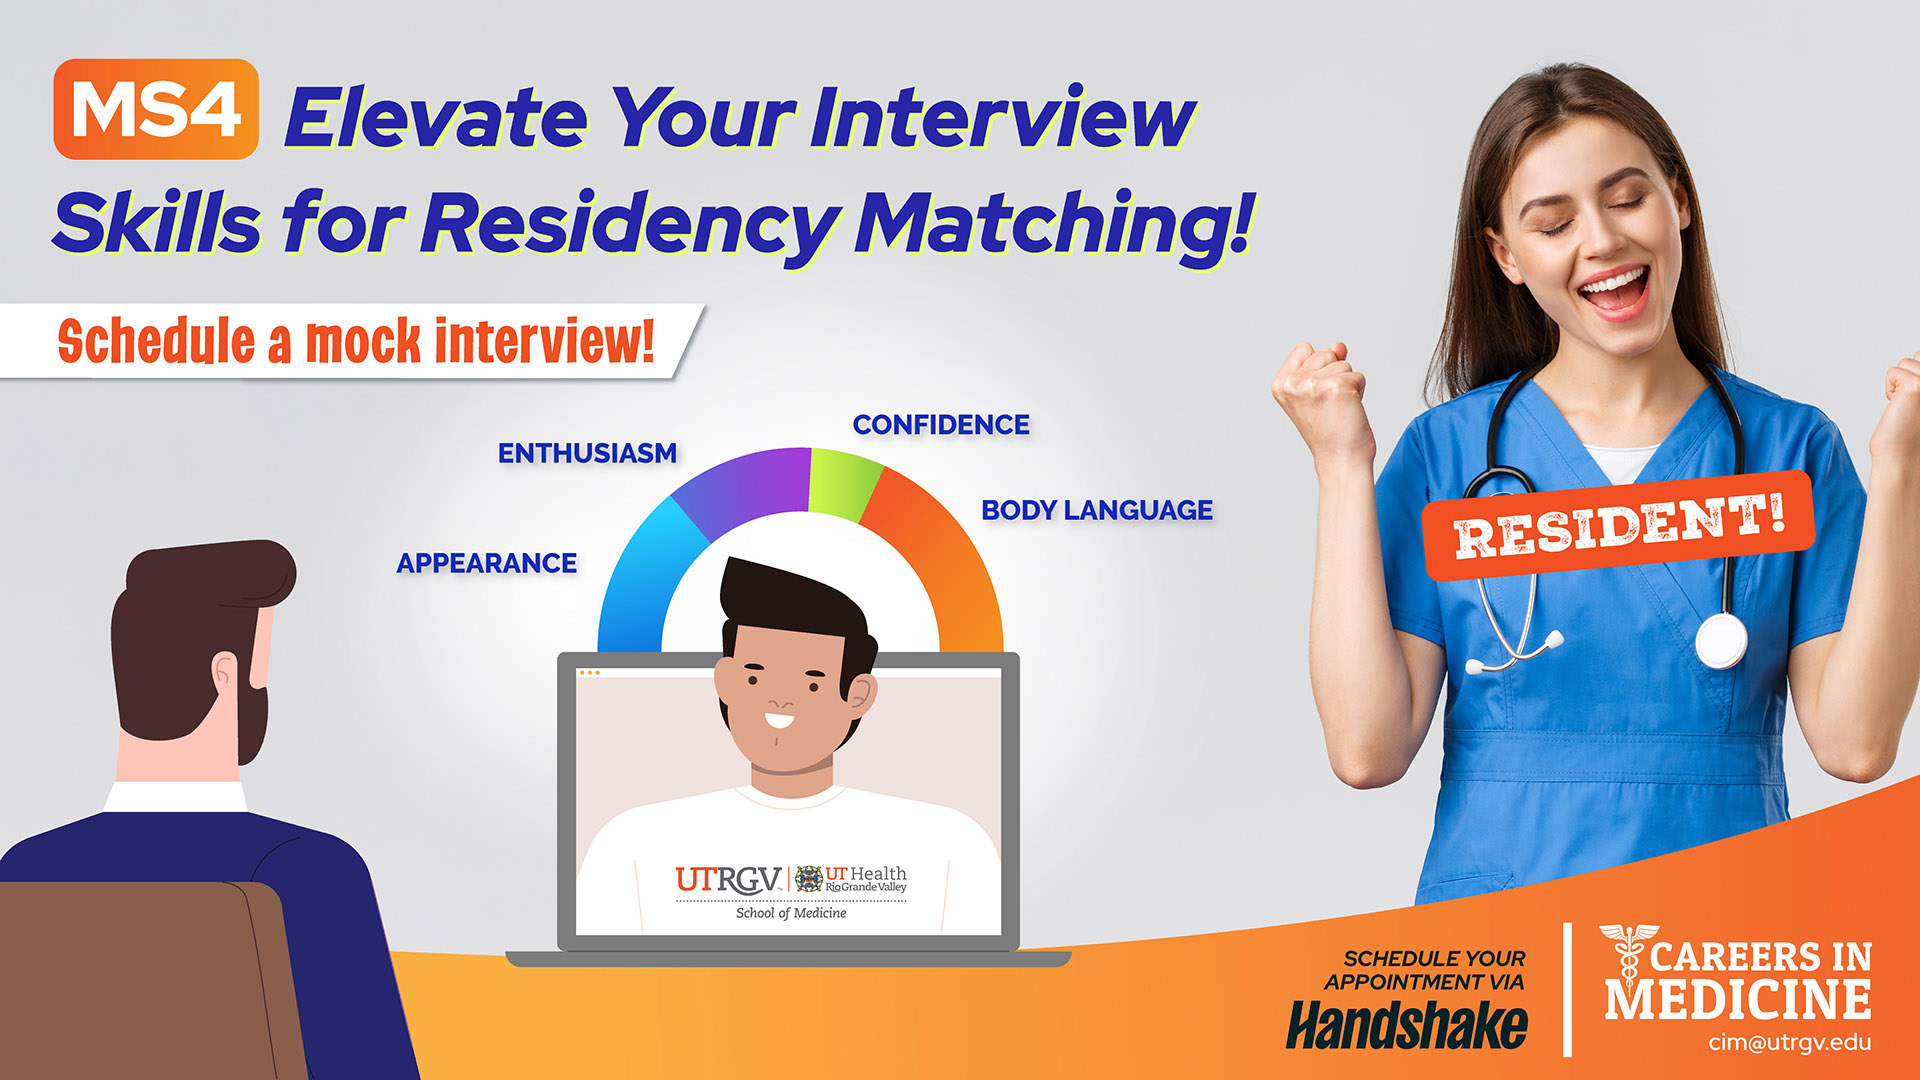 Elevate Your Interview Skills for Residency Matching - Schedule a mock interview!tment through handshake Page Banner 